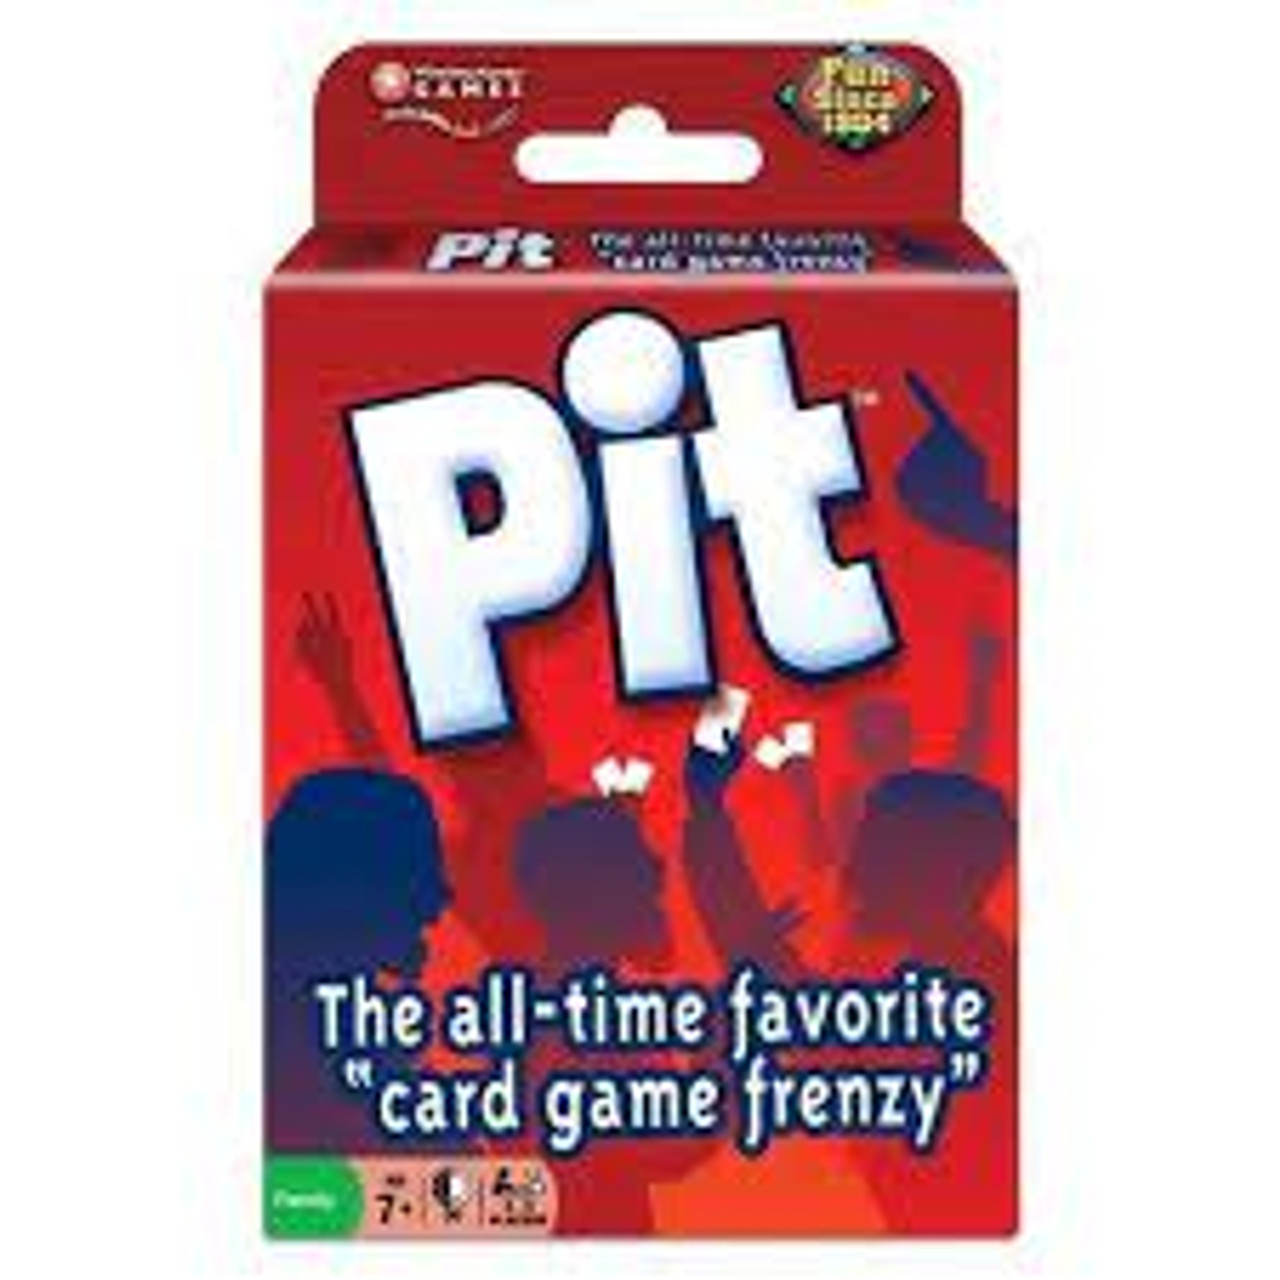 PIT CARD GAME